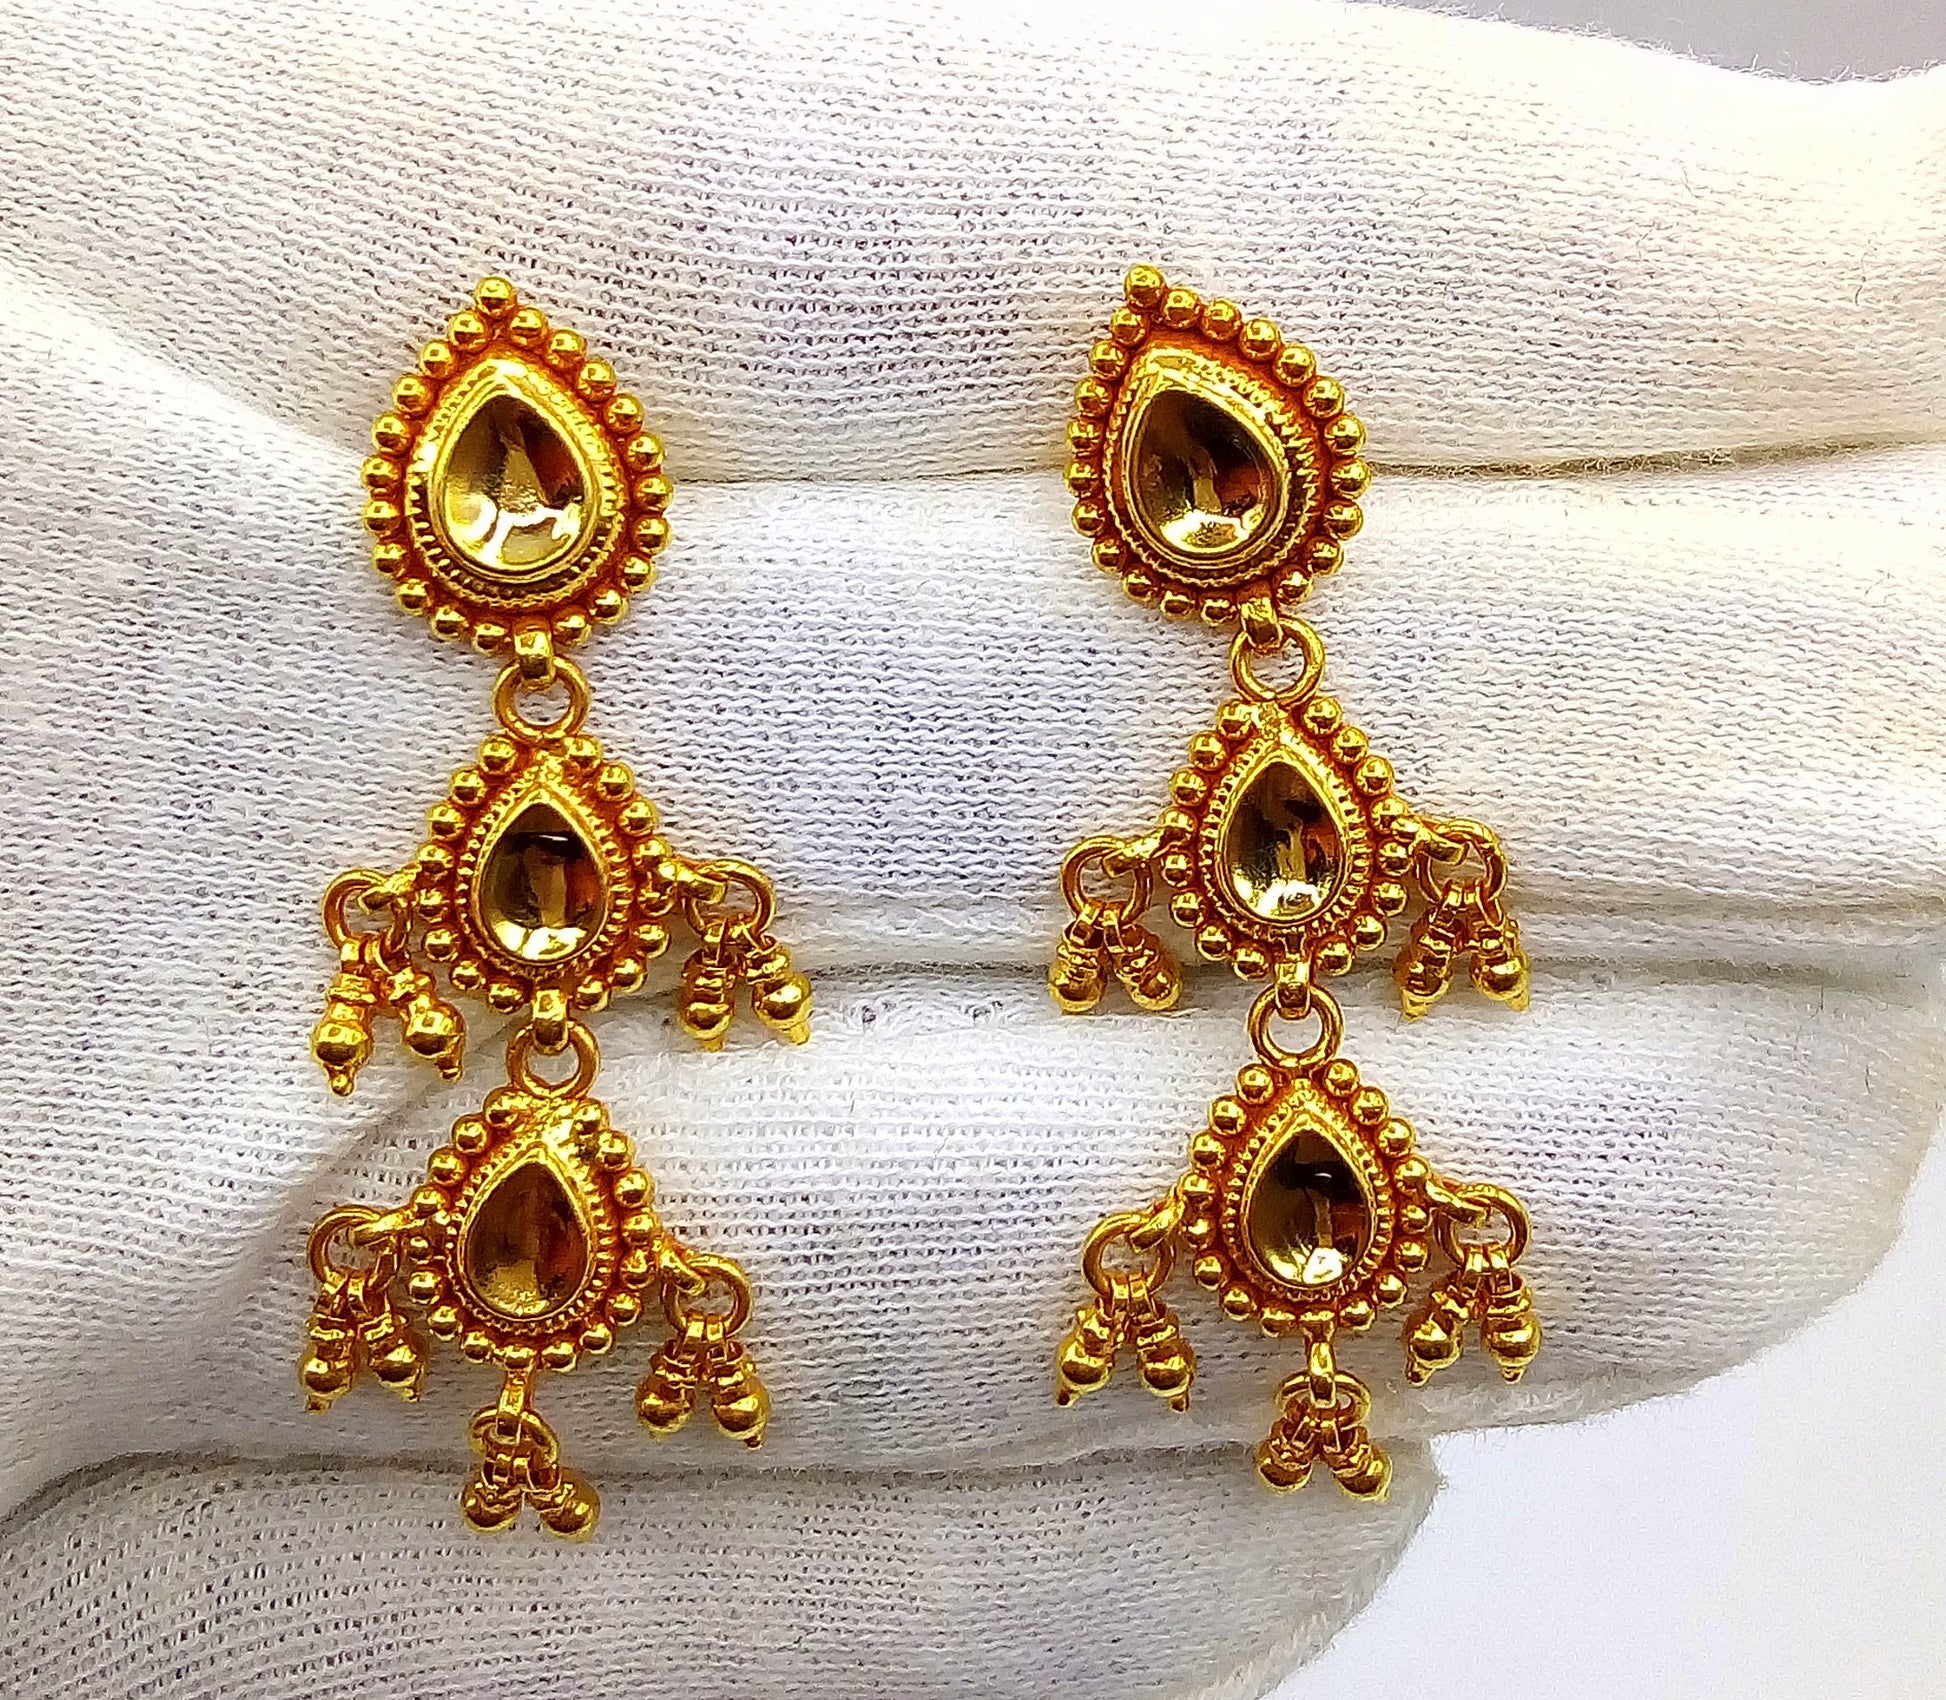 Vintage antique fabulous 22karat yellow gold handmade tussi designer earrings women's tribal jewelry from rajasthan India - TRIBAL ORNAMENTS